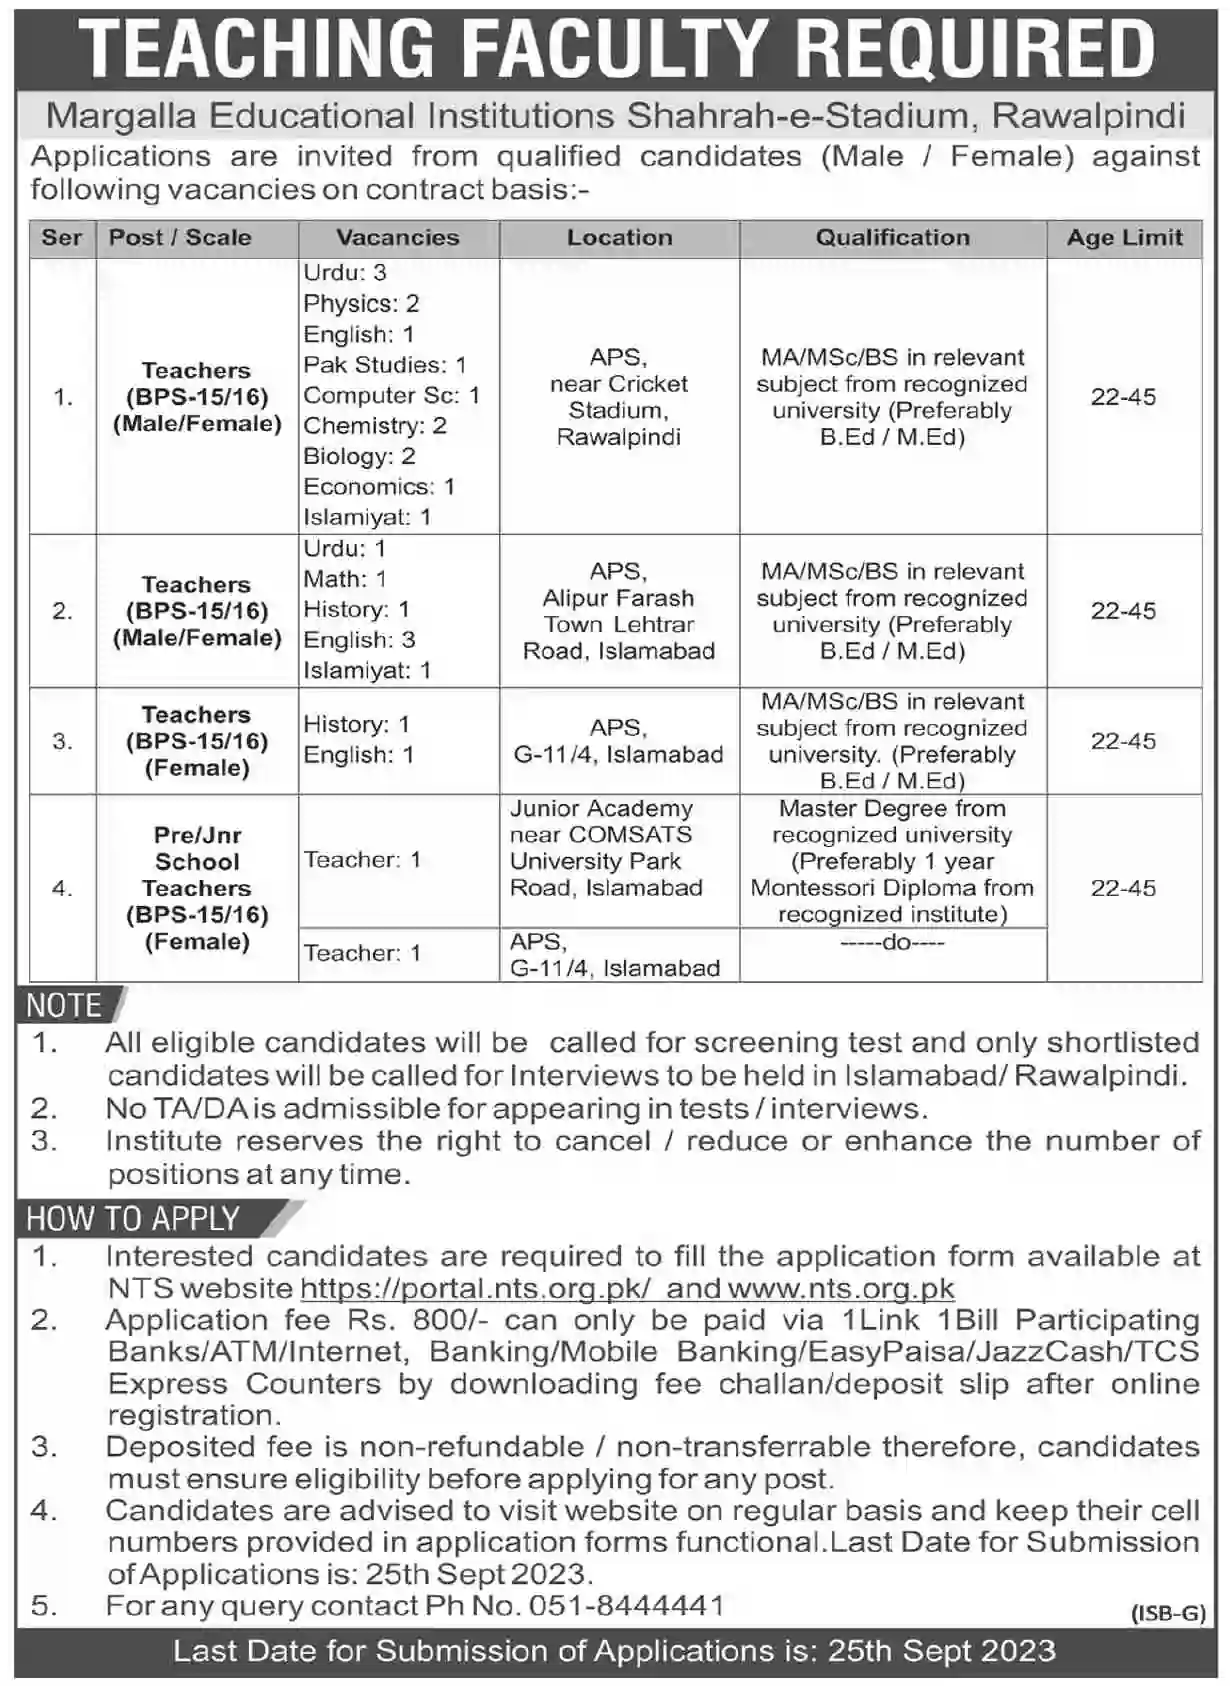 Margalla Educational Institutions Jobs 2023 Inspire Growth